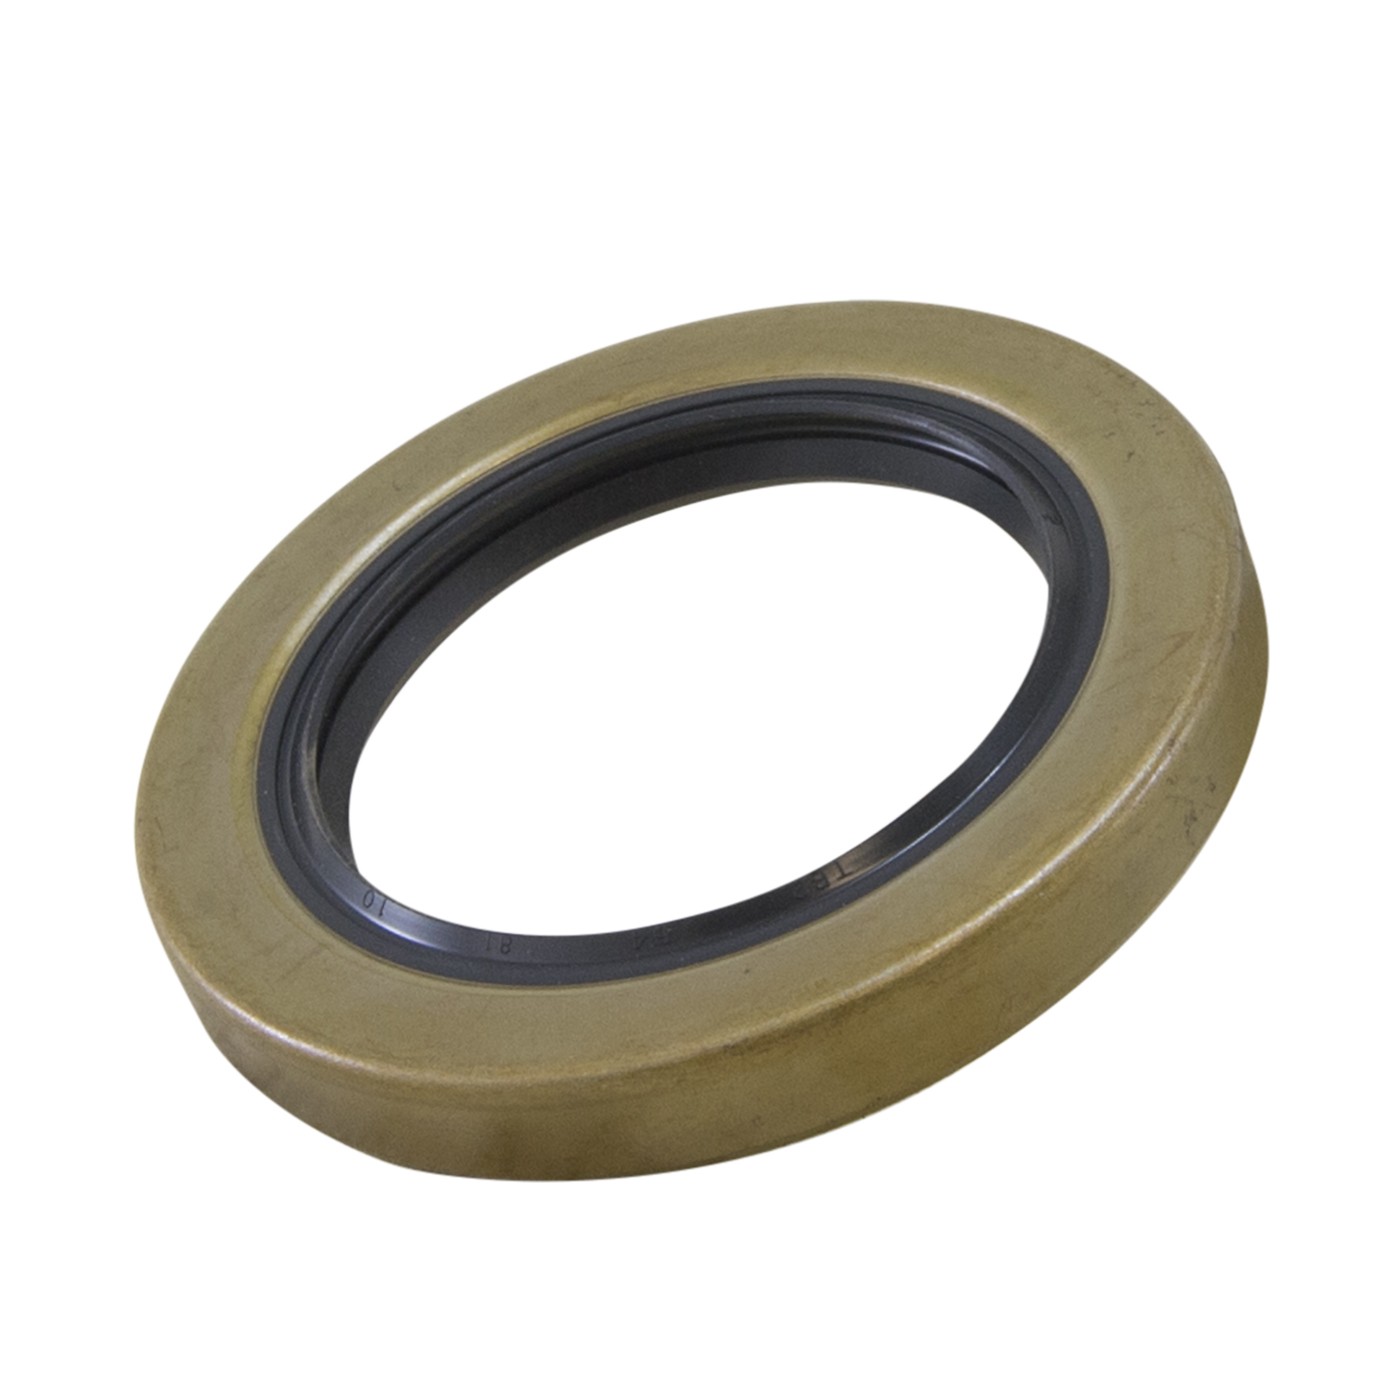 Pinion seal for Gear Works pinion support 